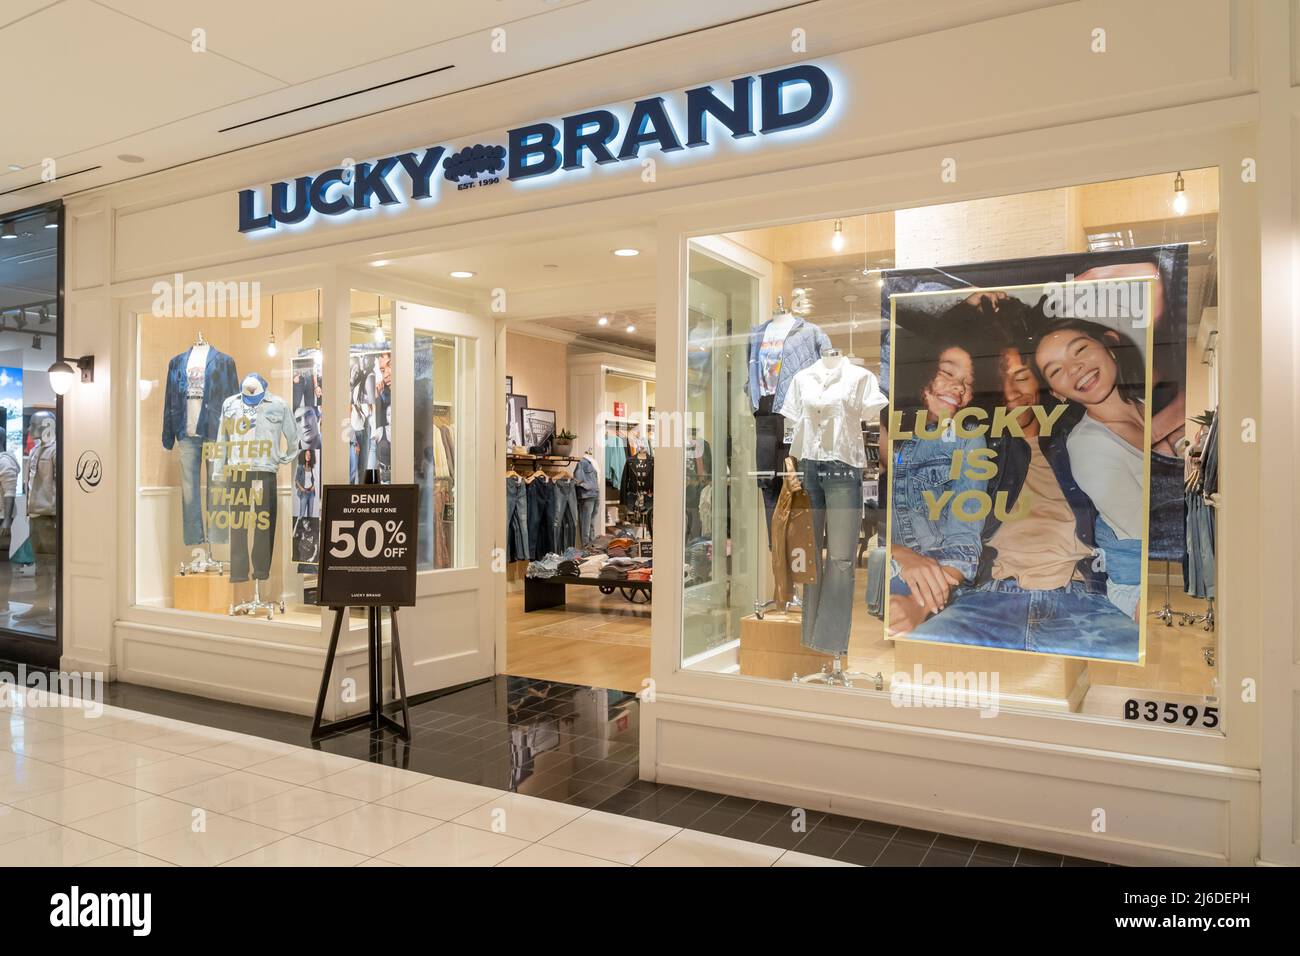 Lucky Brand retail storefront at Westfield Old Orchard Shopping